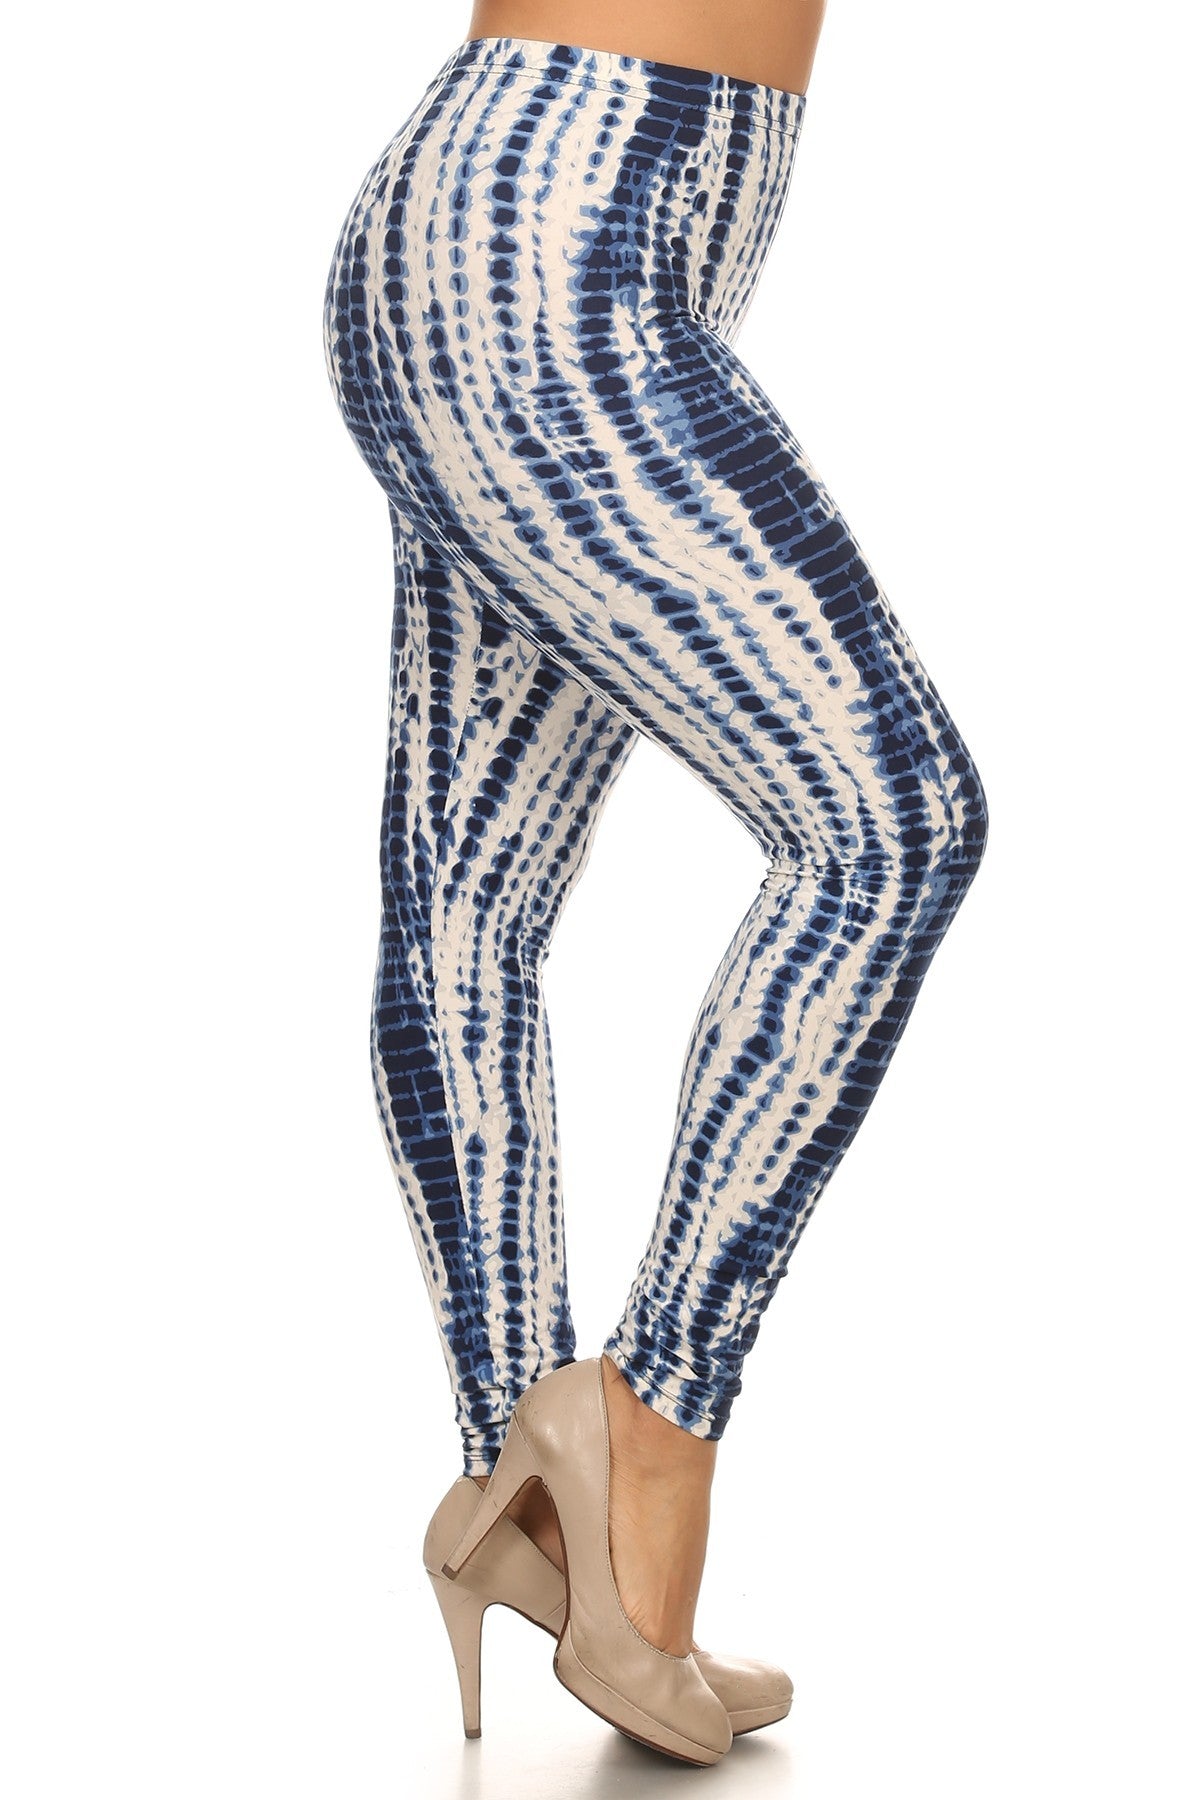 Voluptuous (+) Plus Size Tie Dye Print, Full Length Leggings In A Slim Fitting Style With A Banded High Waist - women's leggings at TFC&H Co.